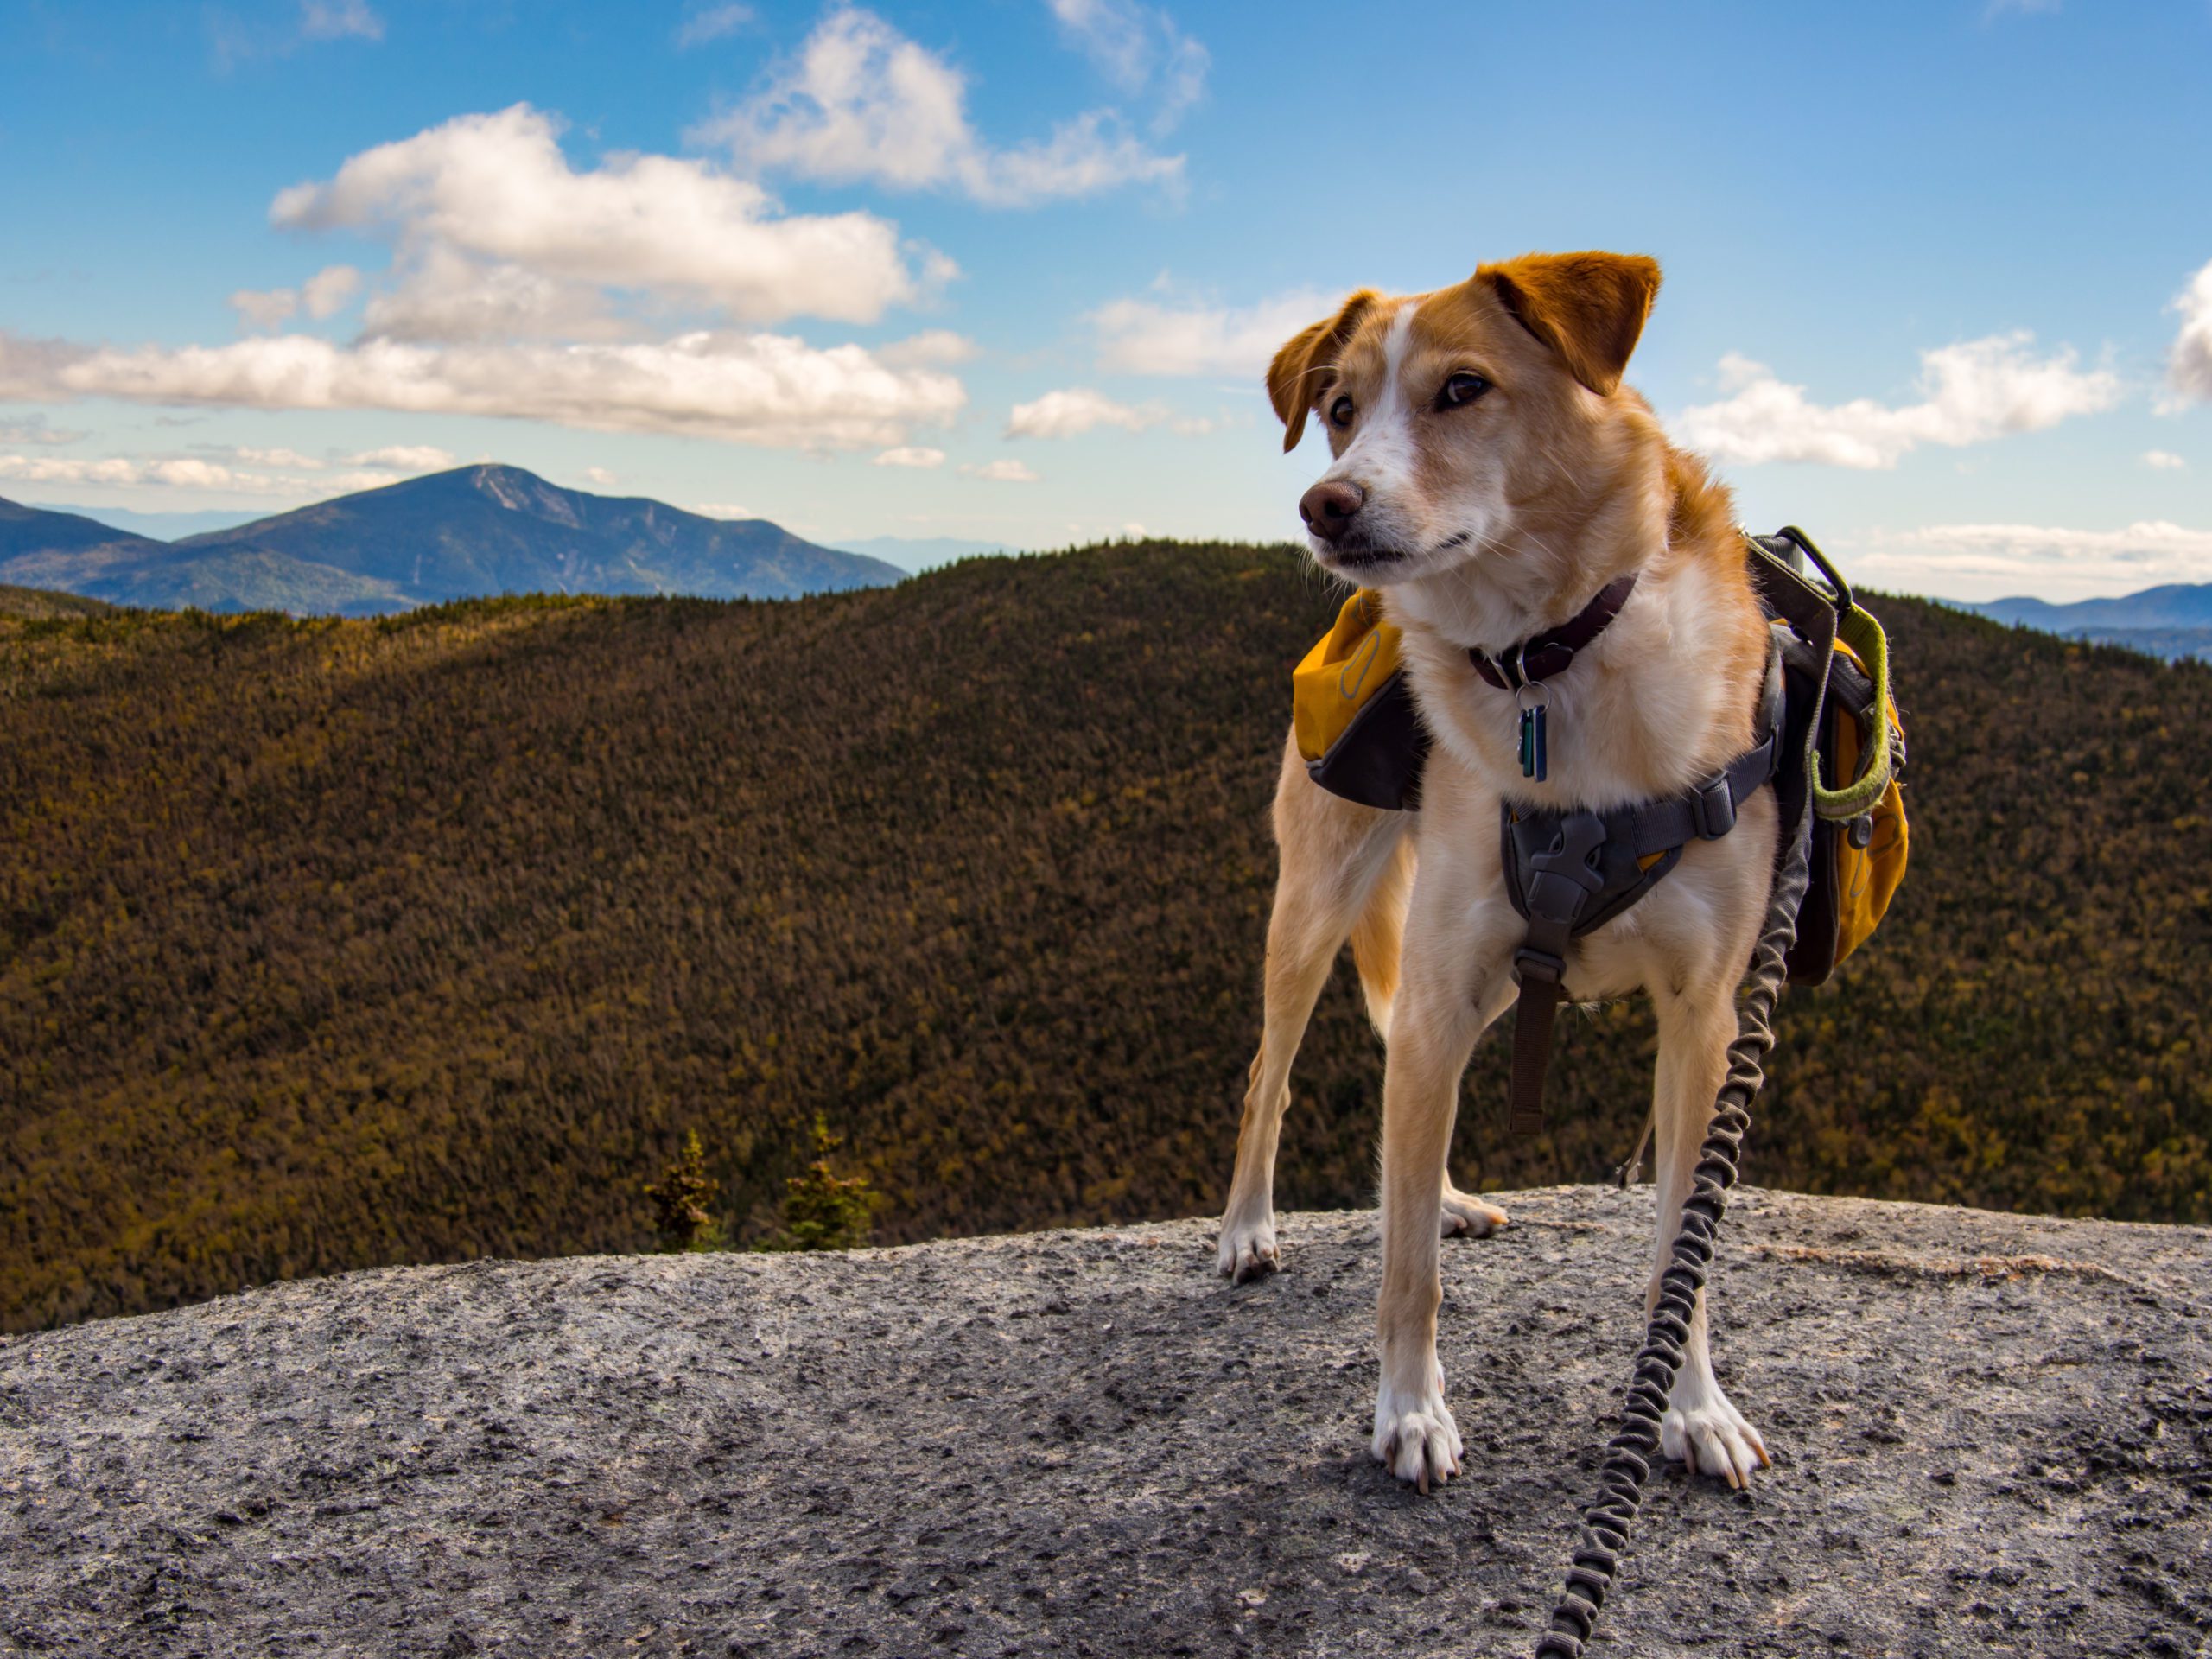 Dog With Backpack On Mountain Summit